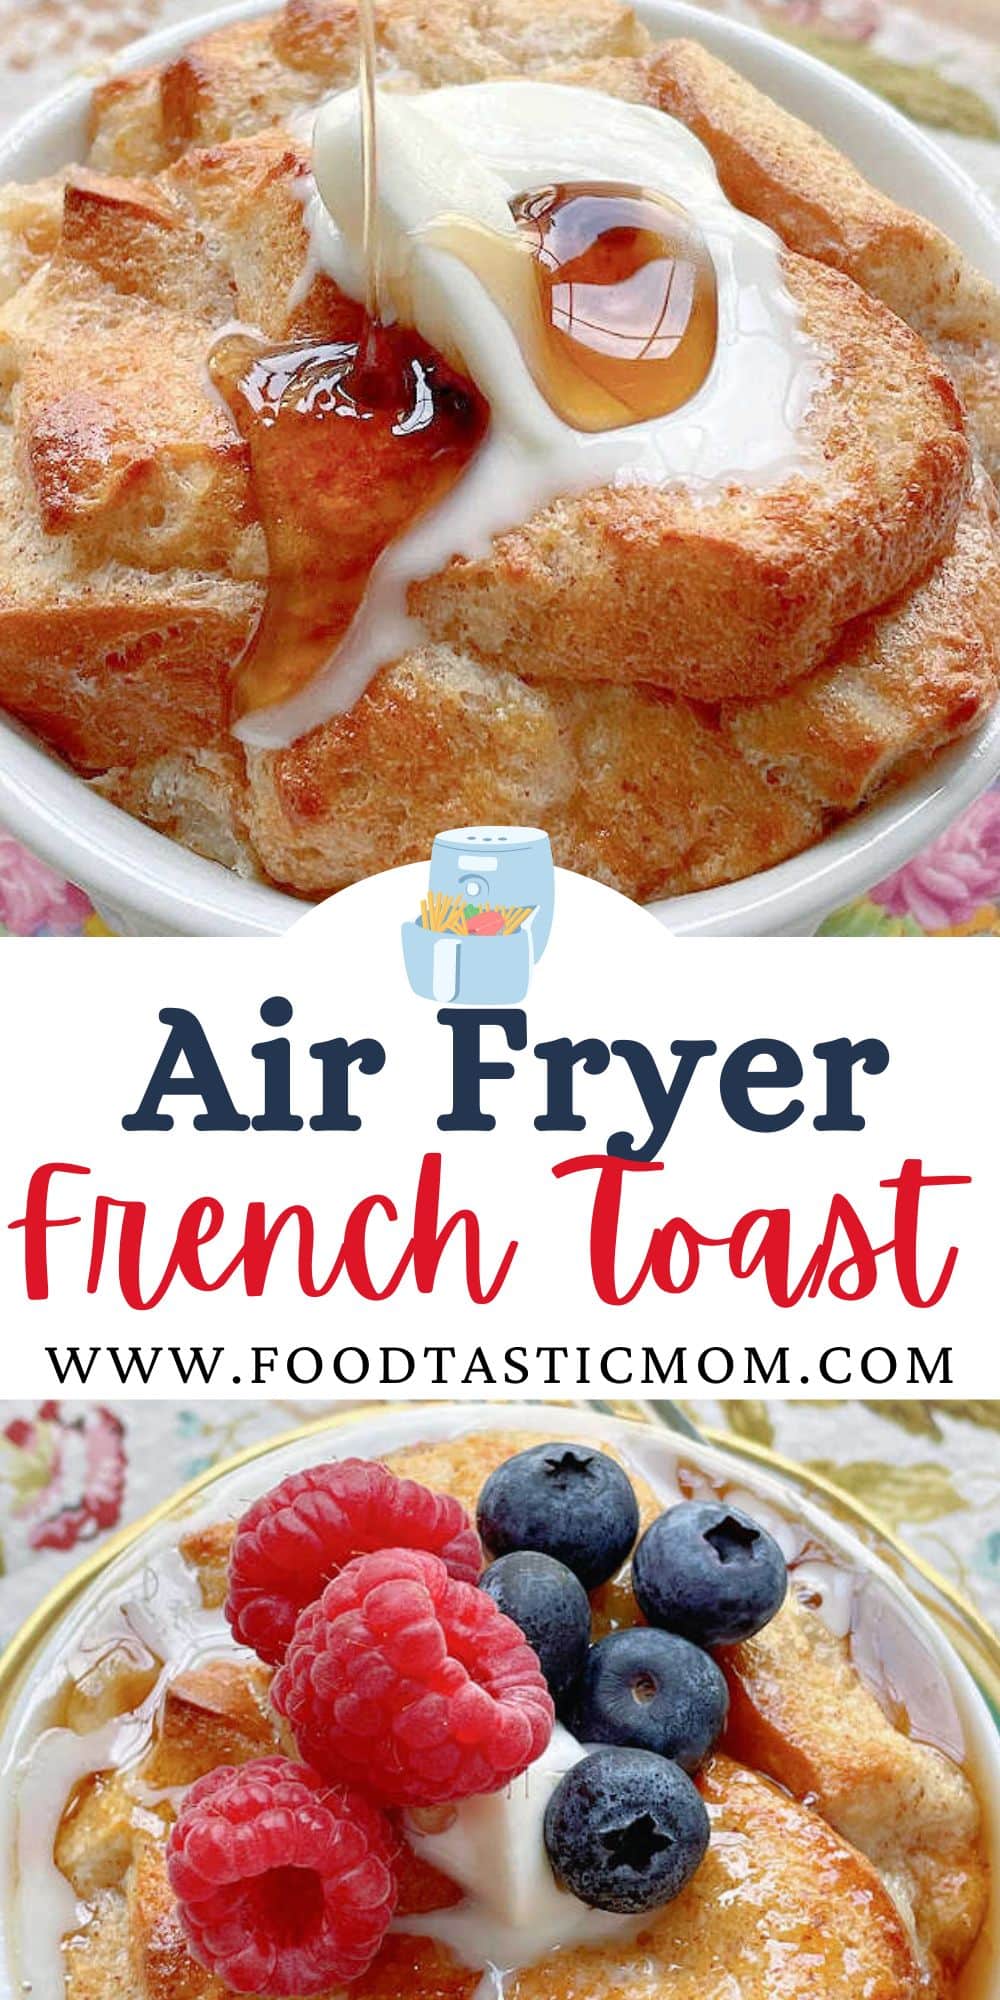 You may never make french toast in a skillet again. This Air Fryer French Toast is a dream breakfast - fast, filling and sinfully delicious. via @foodtasticmom